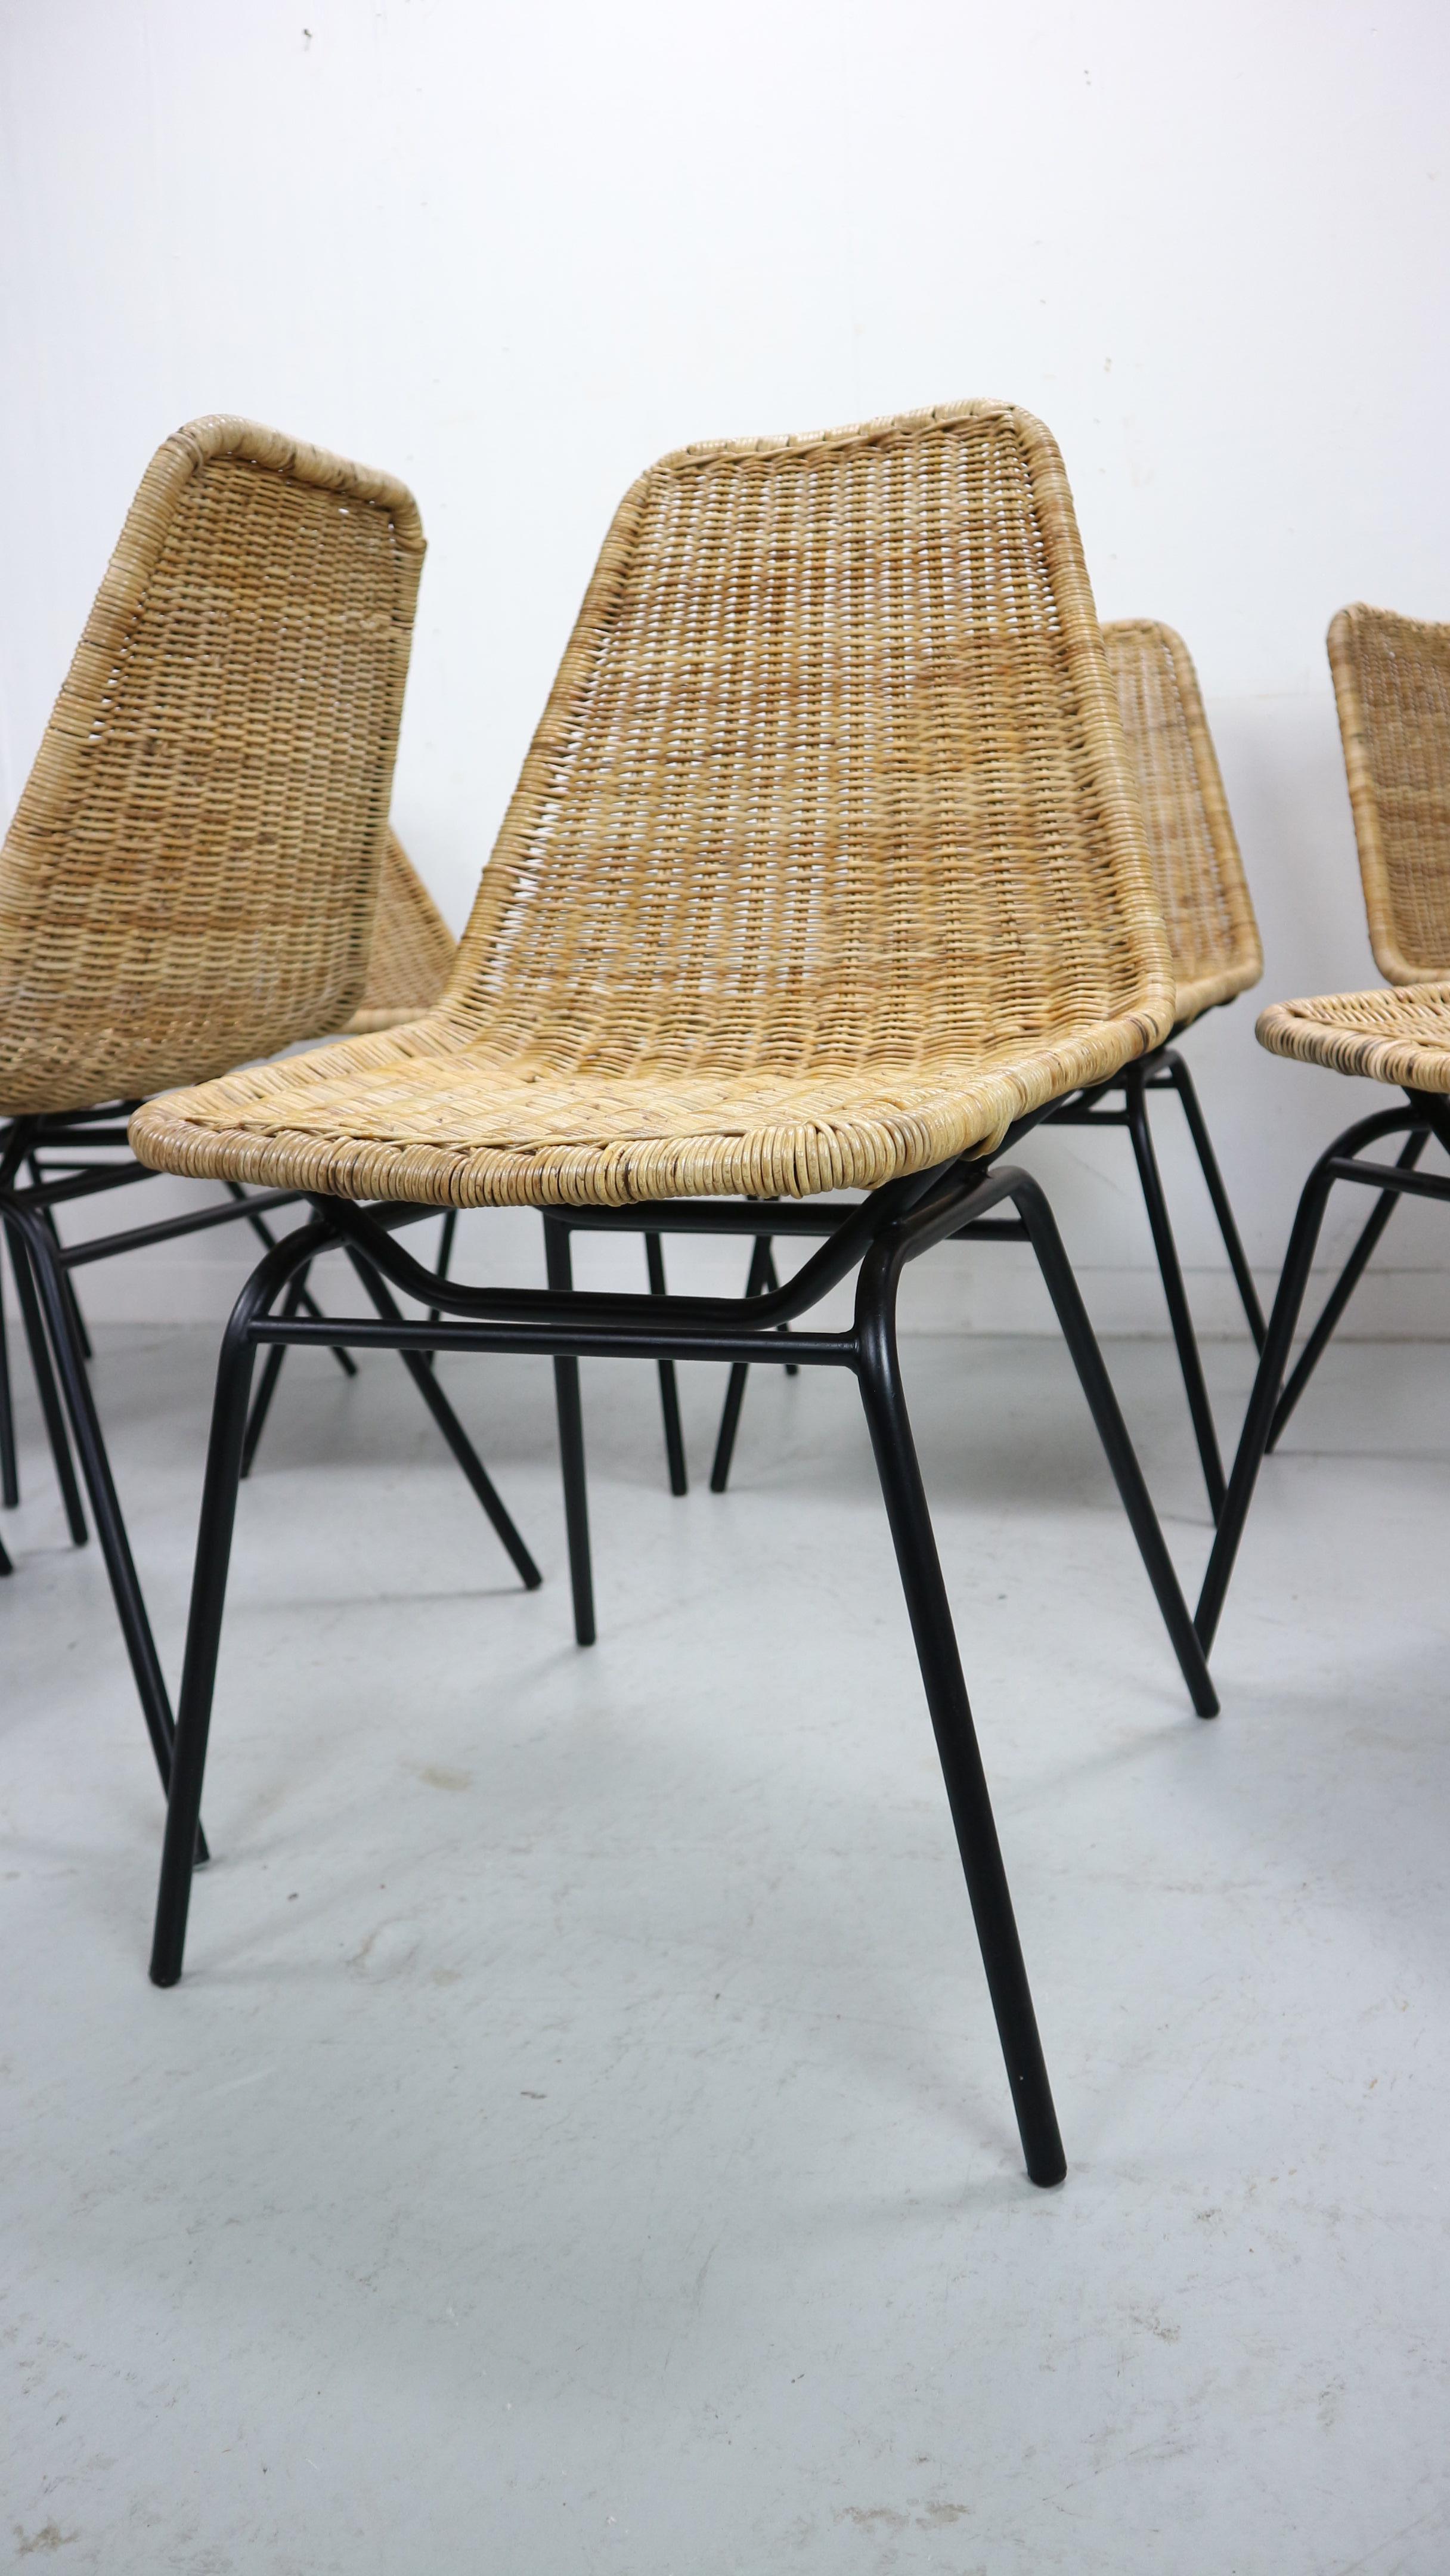 set of 8 wicker chairs model 'italia 100' from the 1960s, Netherlands For Sale 4